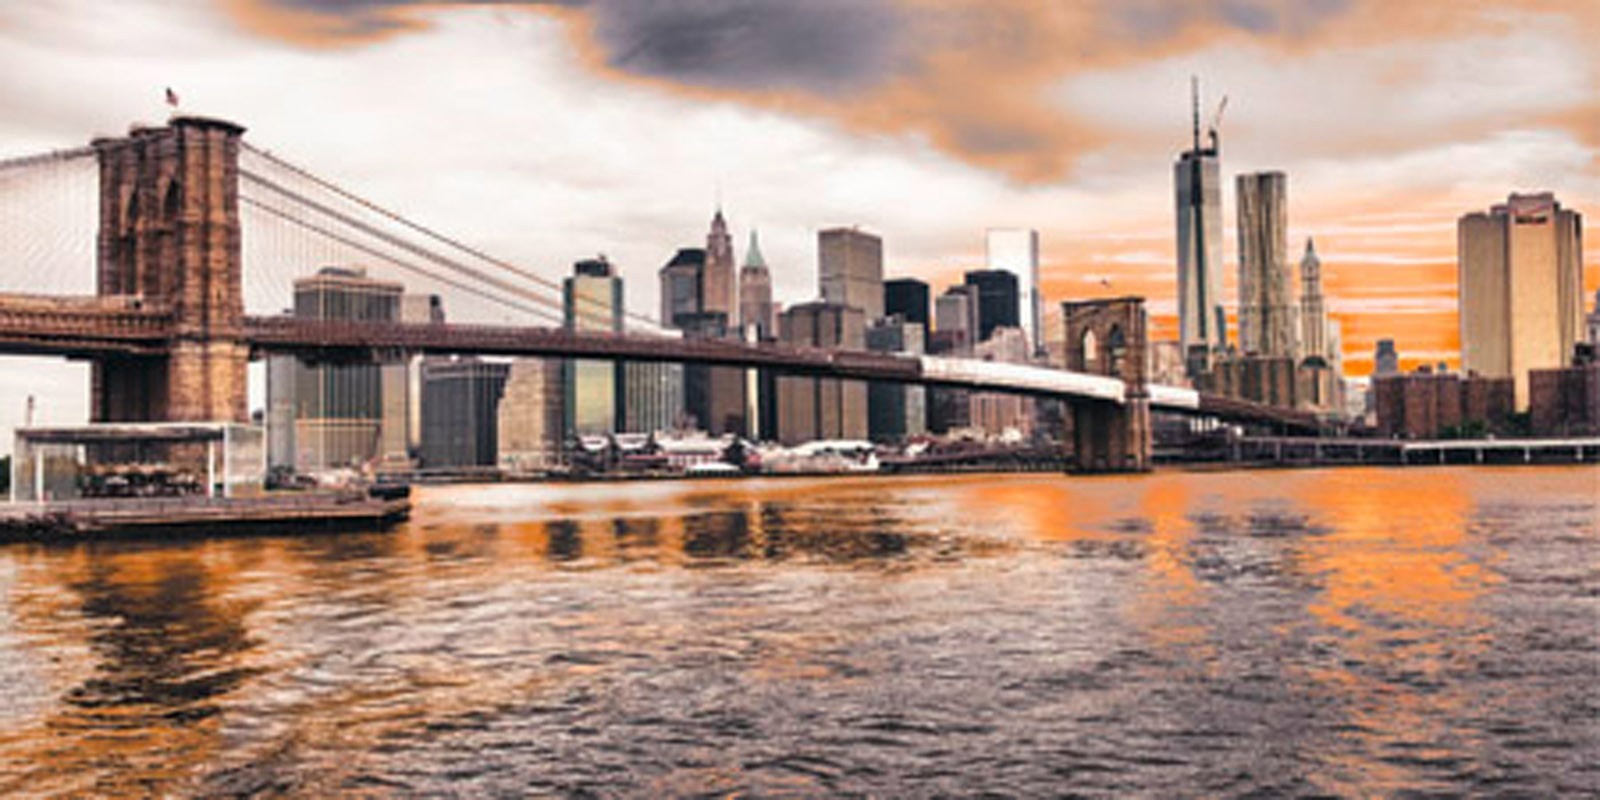 Pangea Images - Brooklyn Bridge and Lower Manhattan at sunset, NYC